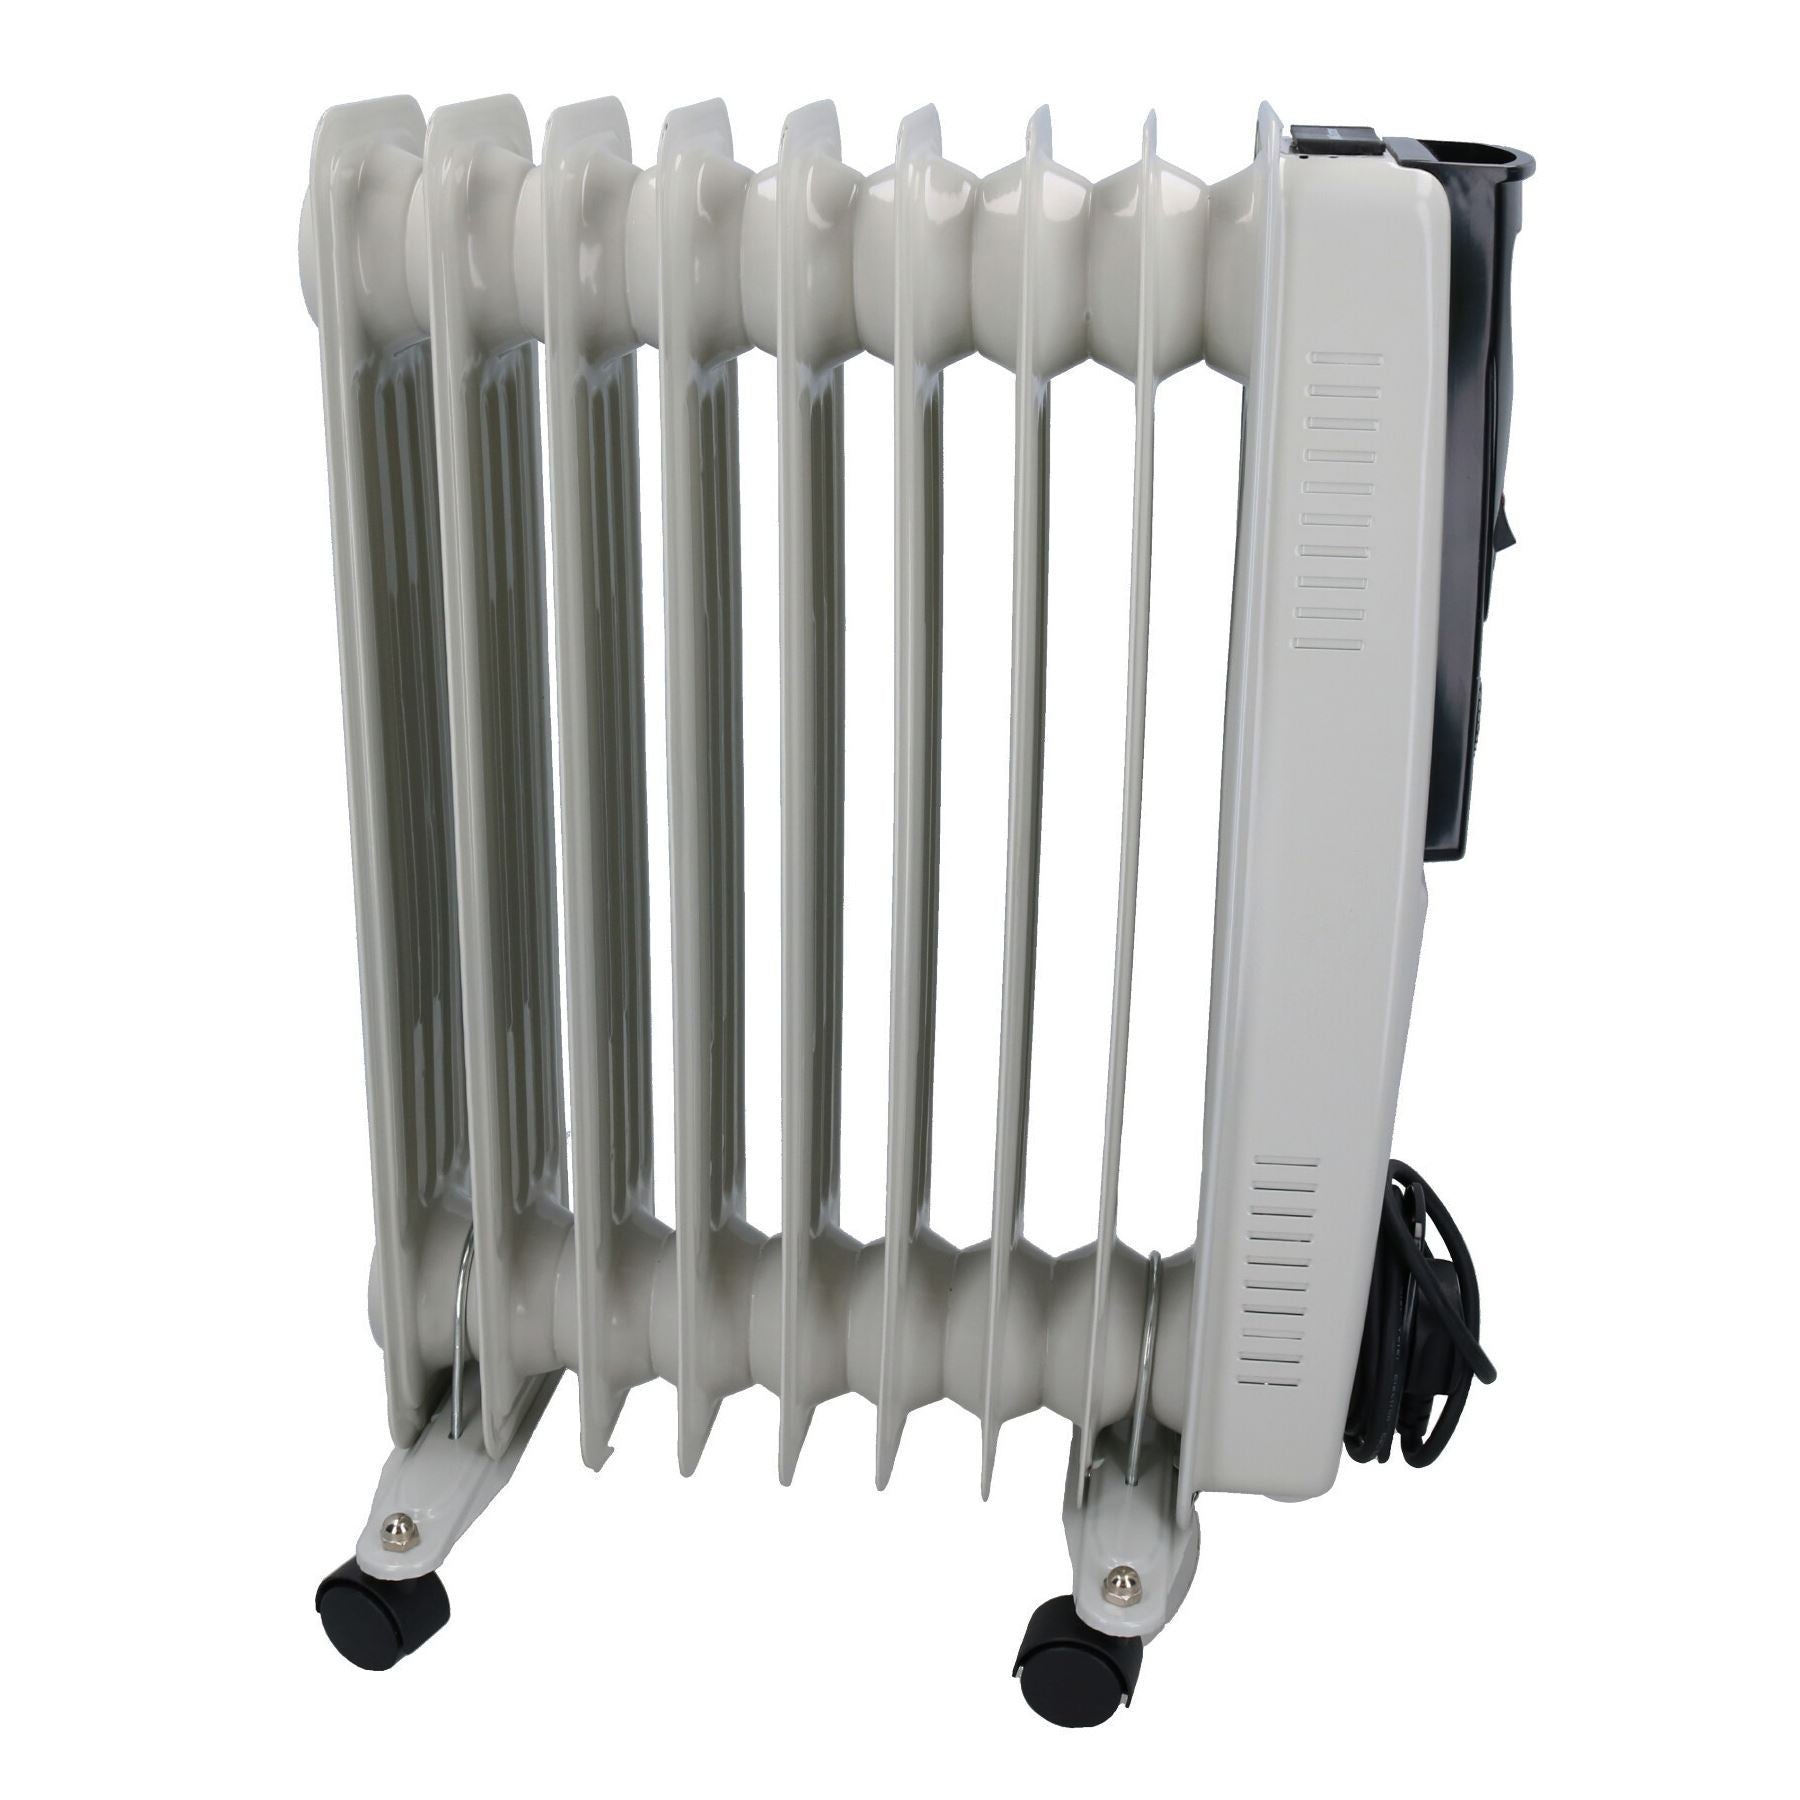 2KW 9 Fin Slim line Oil Filled Radiator Heater With Adjustable Thermostat White